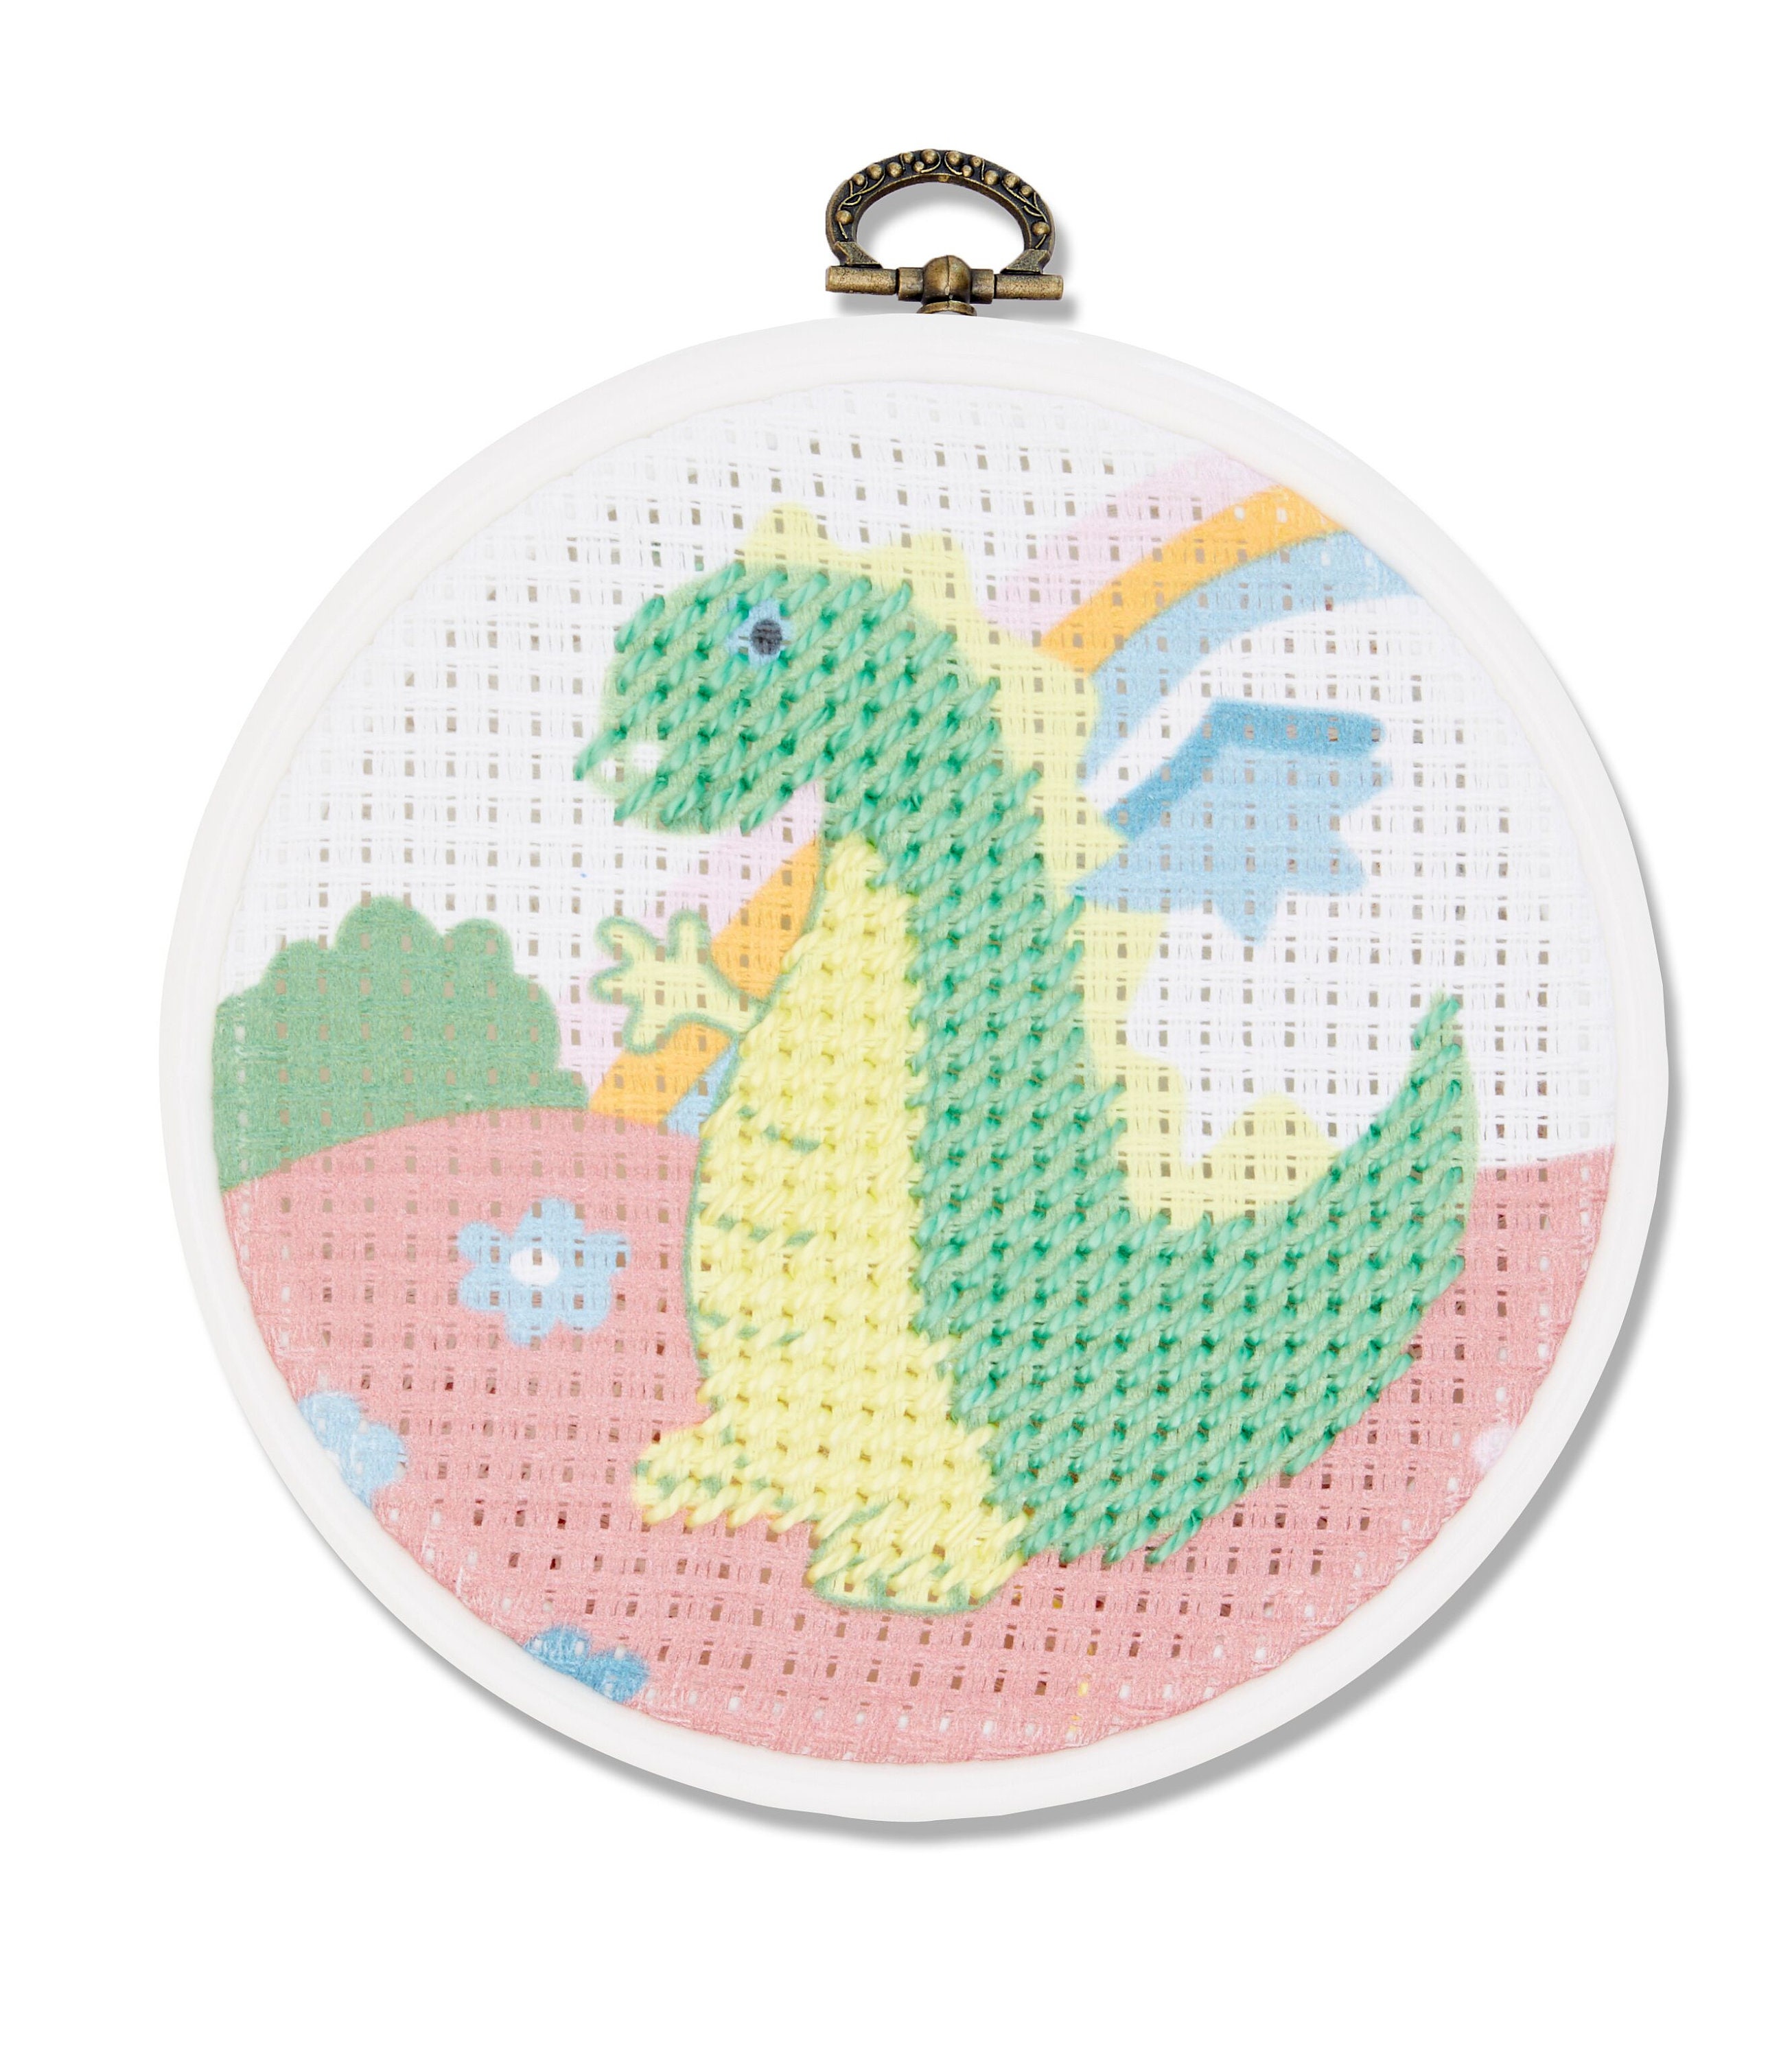 Rainbow Beginners Embroidery Kit, Kids Friendly Crafts, Hand